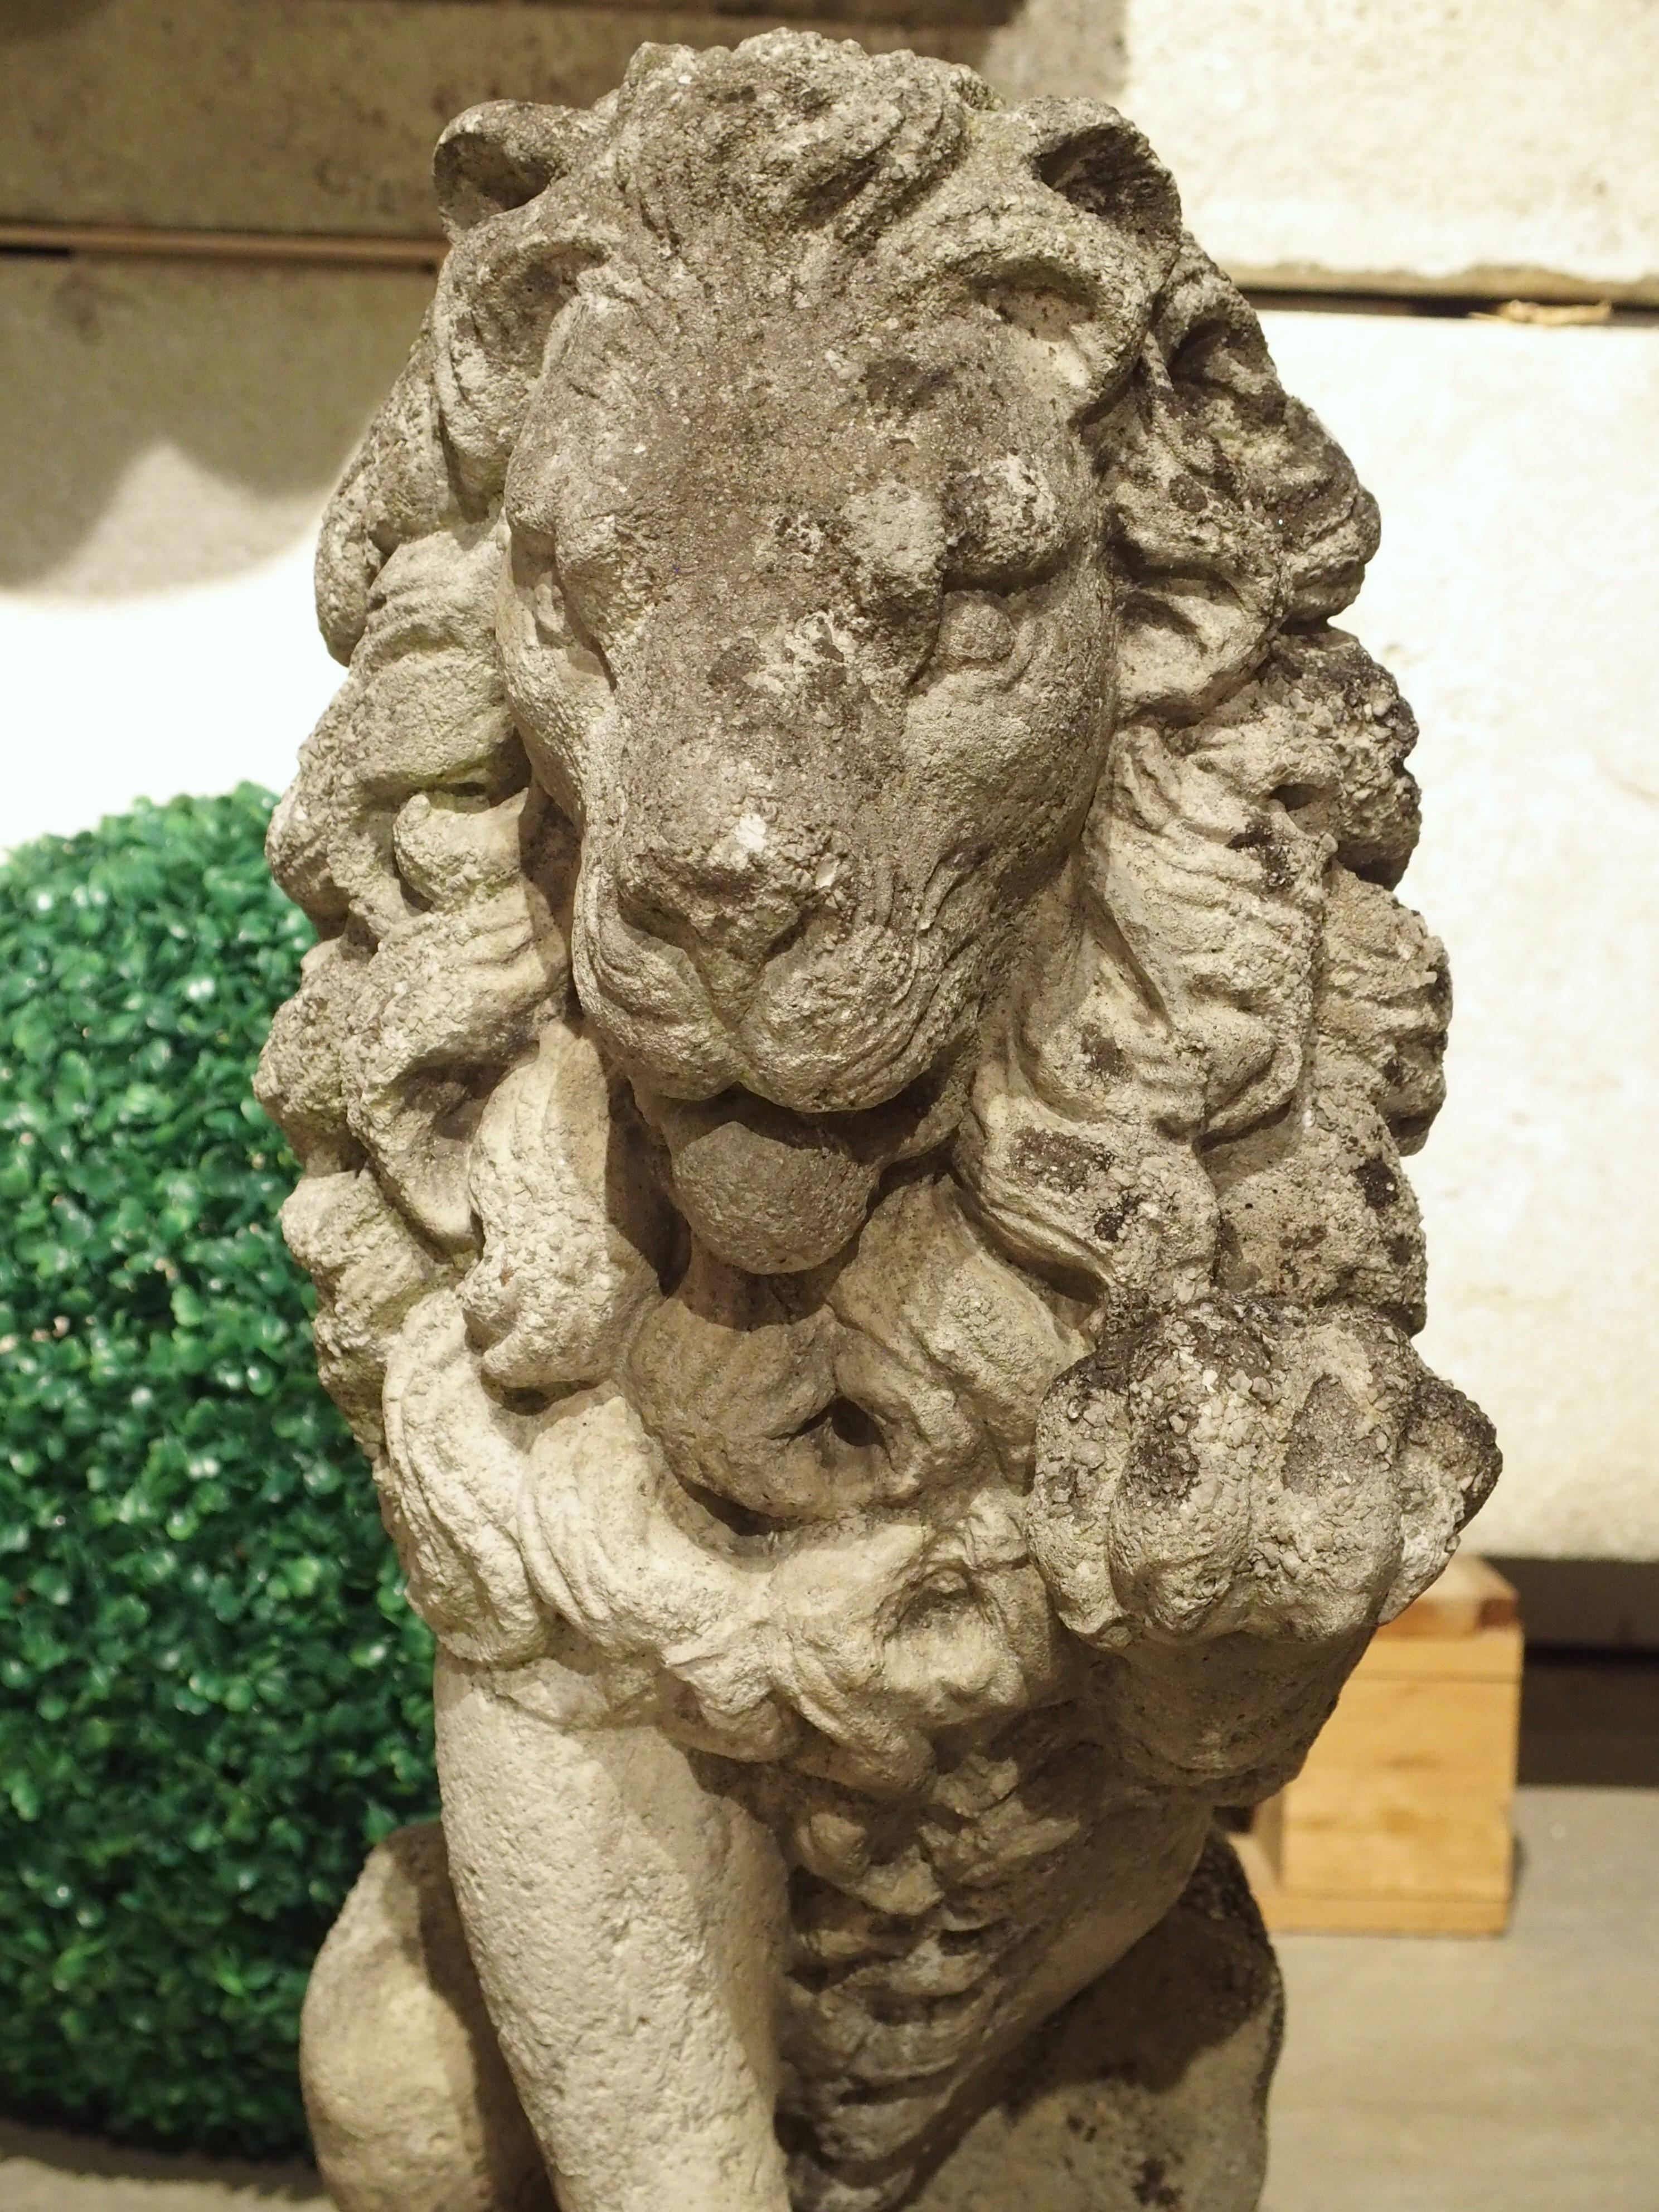 Cast in the early 1900s using reconstituted stone, this pair of stone lions are reminiscent of the famous Medici lion sculptures that currently grace the steps of the Loggia dei Lanzi in Florence. Our lions, which are mirror images of each other,